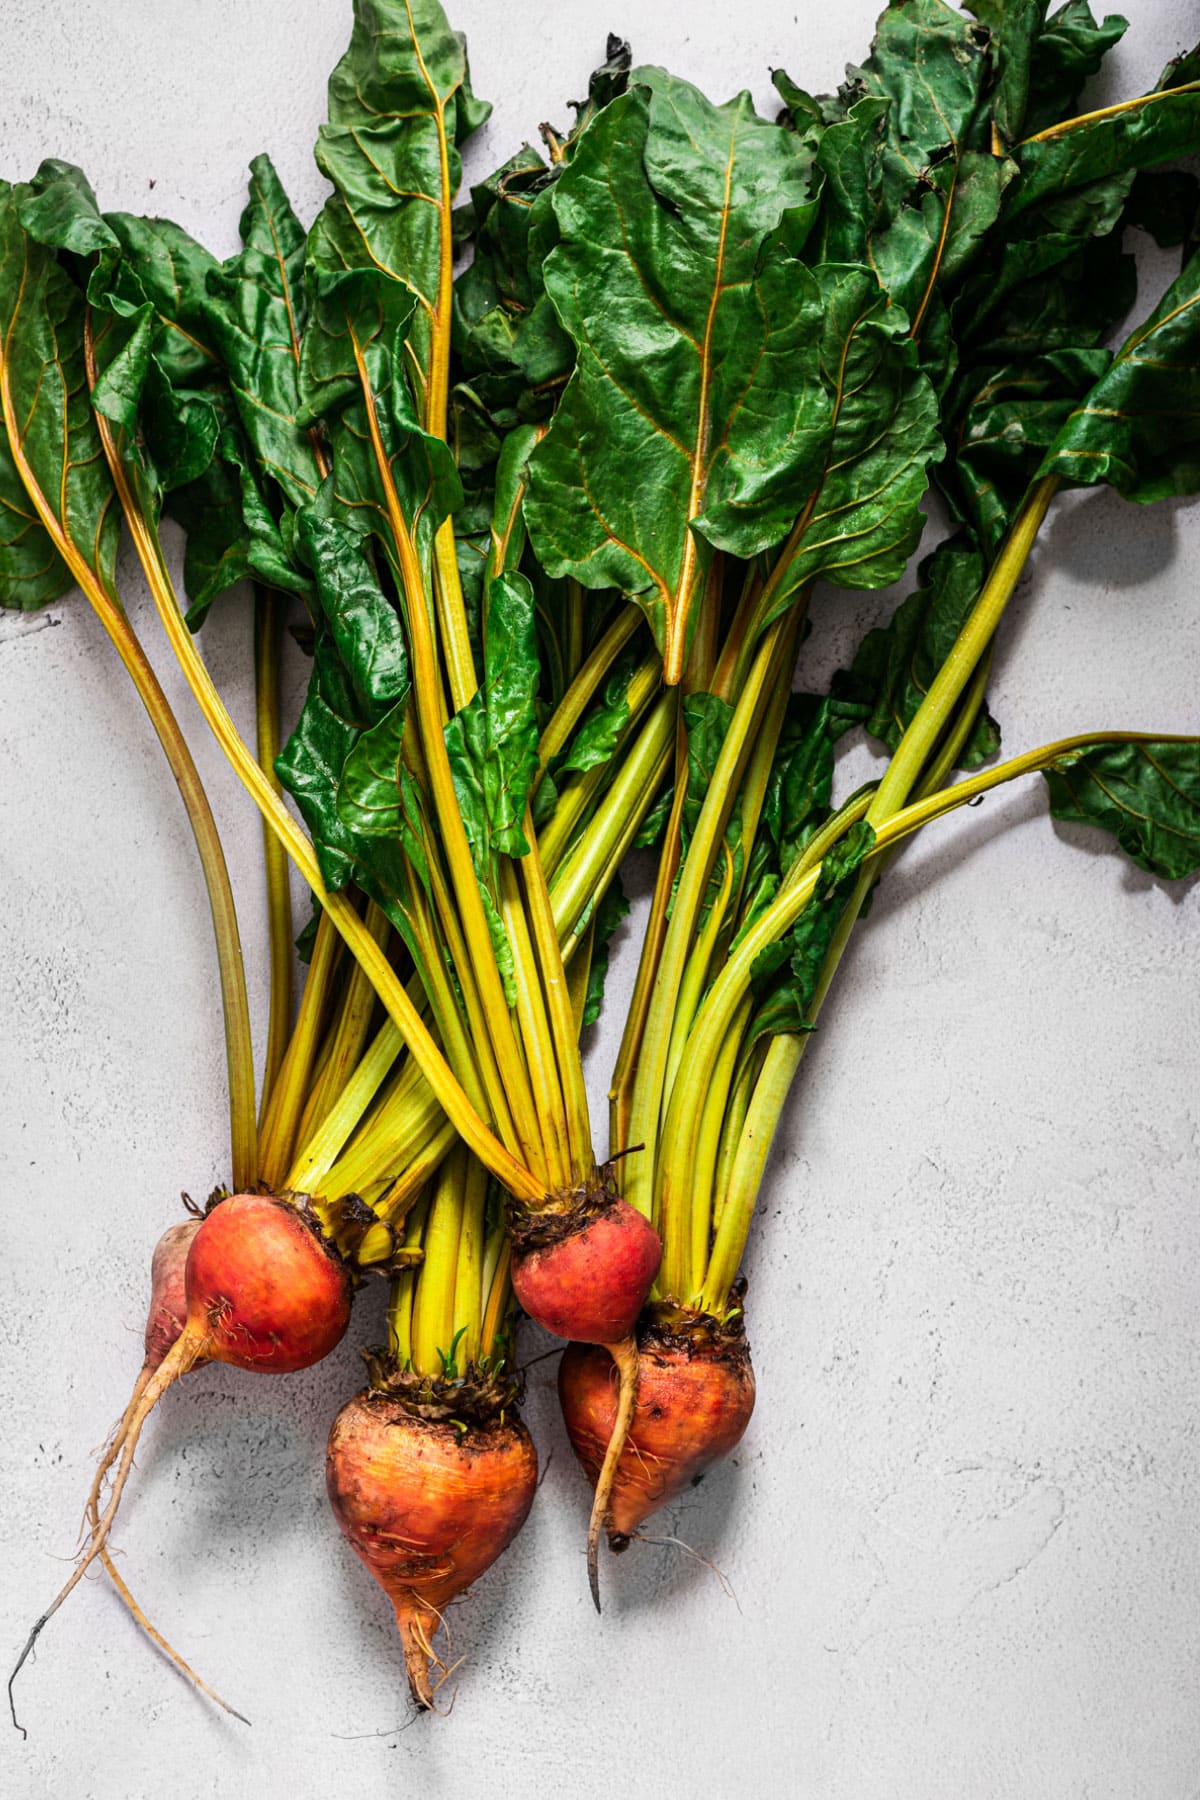 Superfood Spotlight: What are beets? | The Crooked Carrot